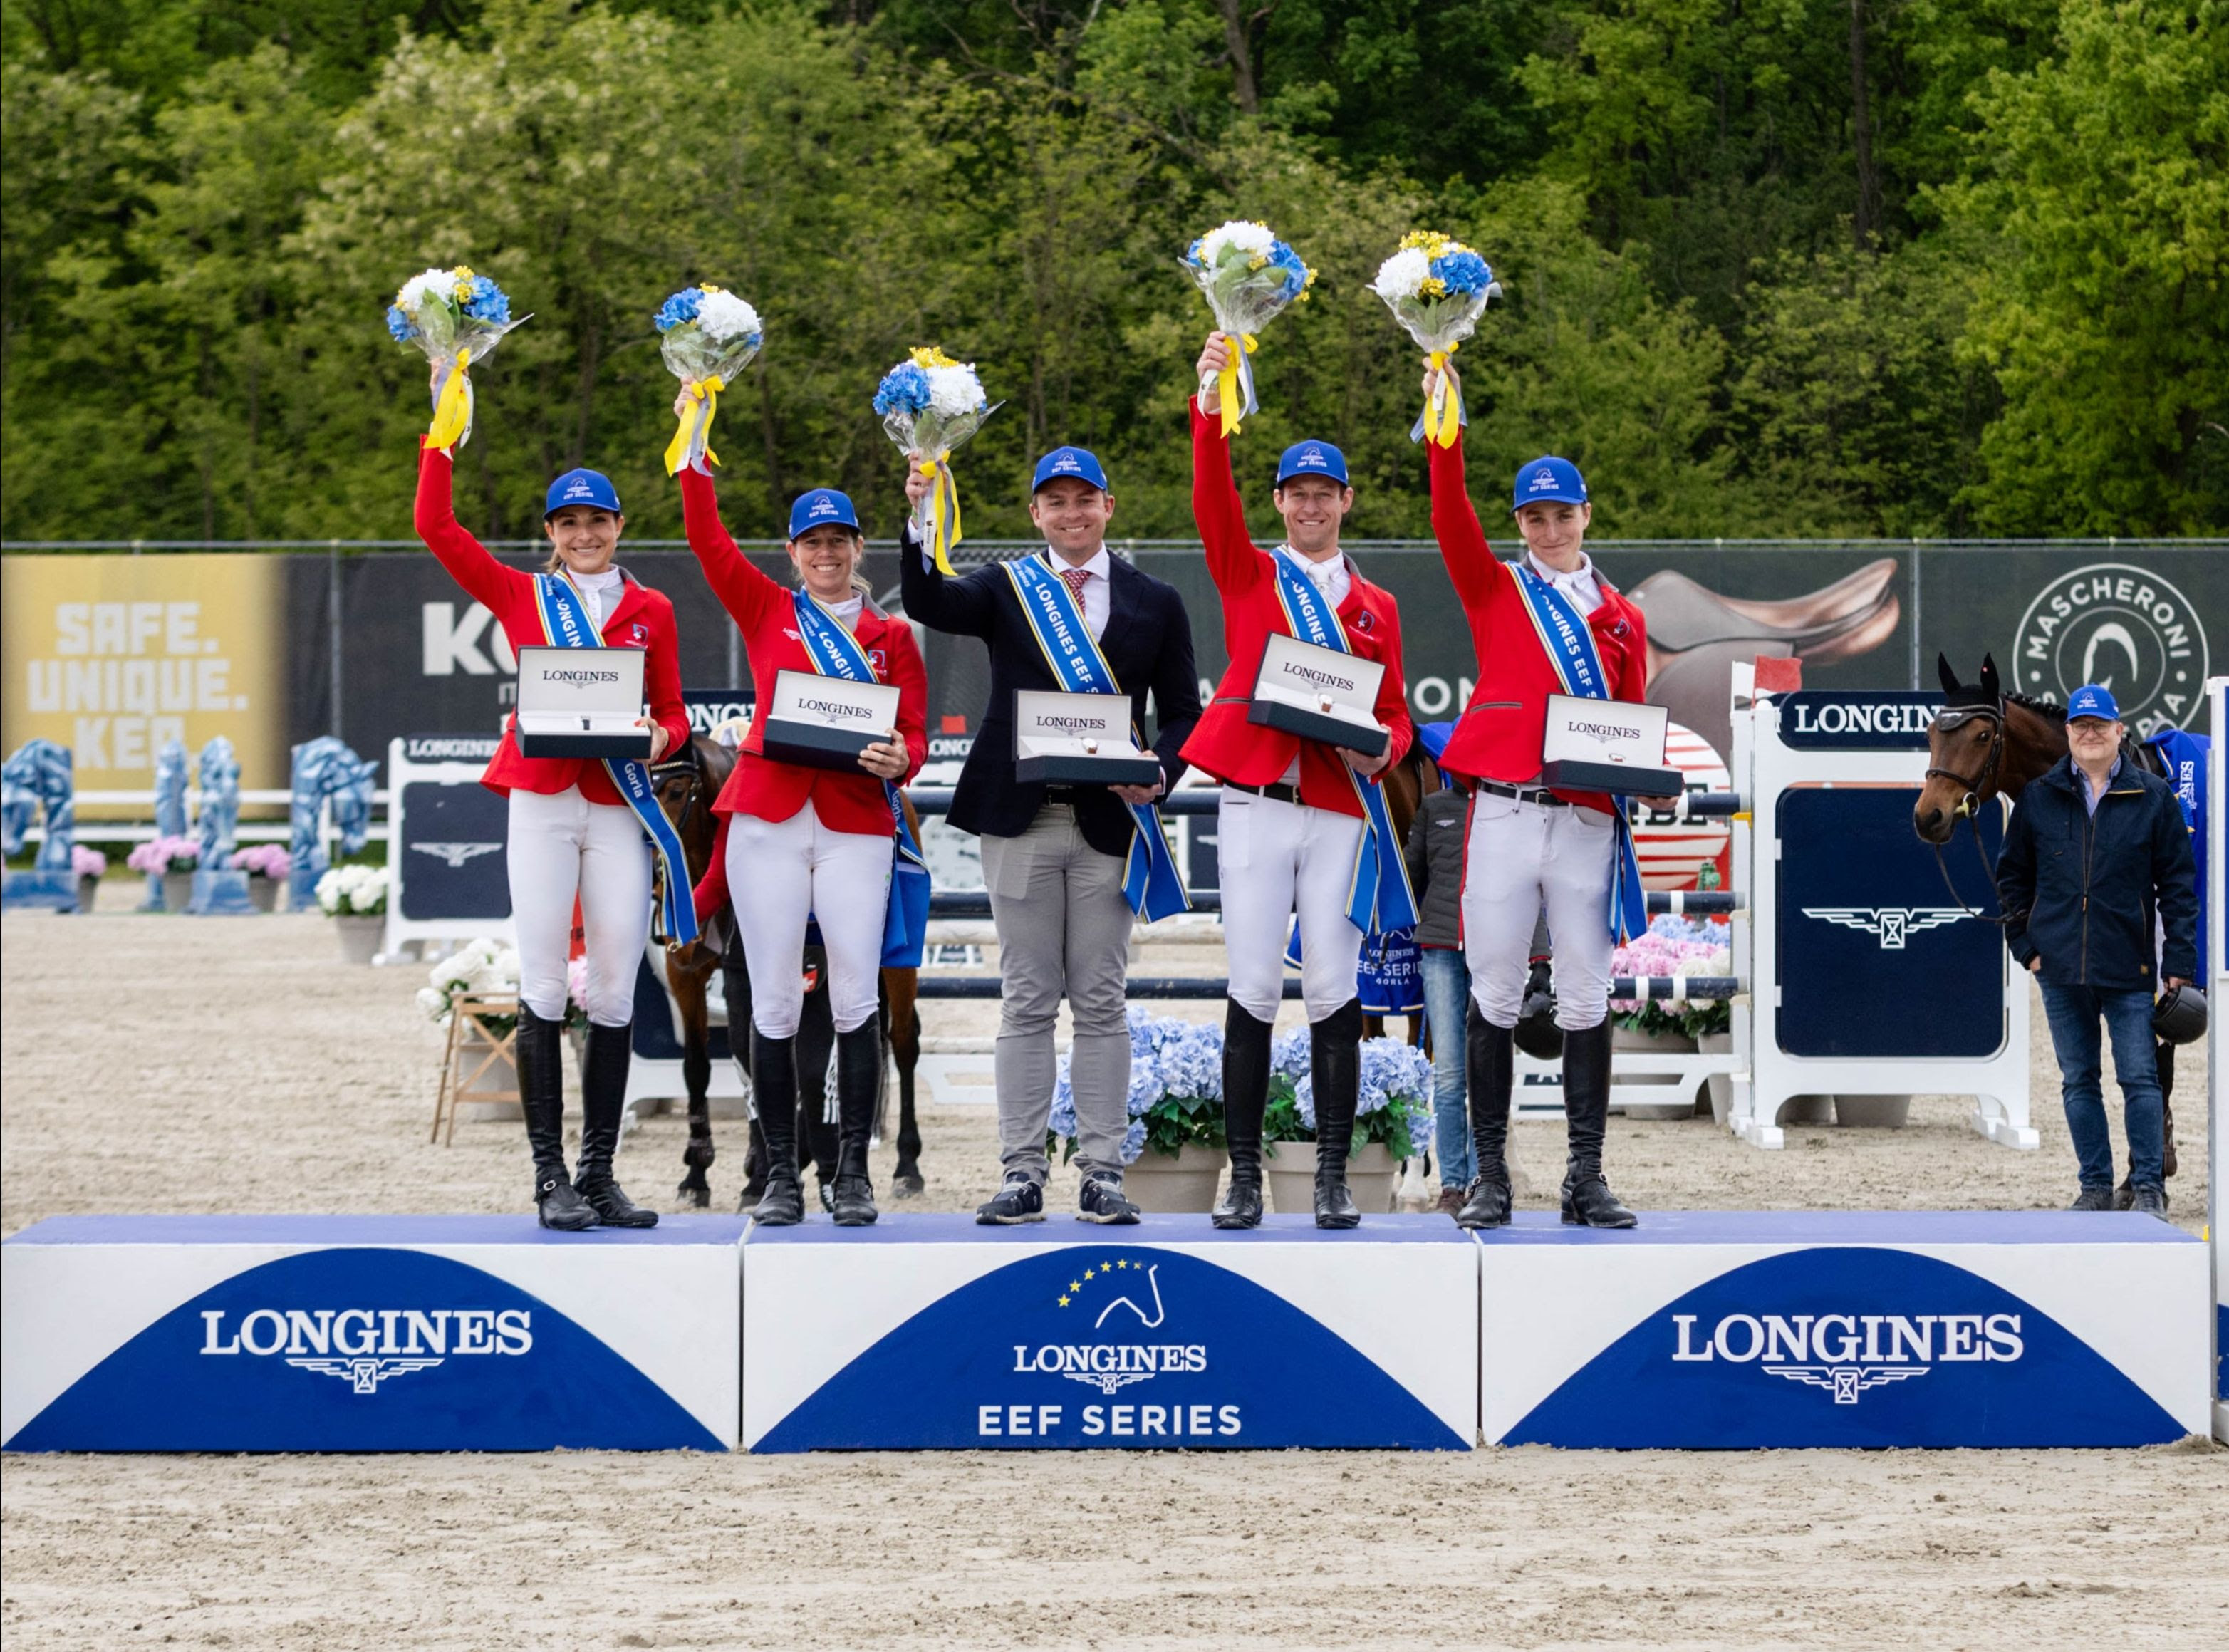 Switzerland Kicks-off with EEF Nations Cup win. "Our two debuting riders did fabulous!"